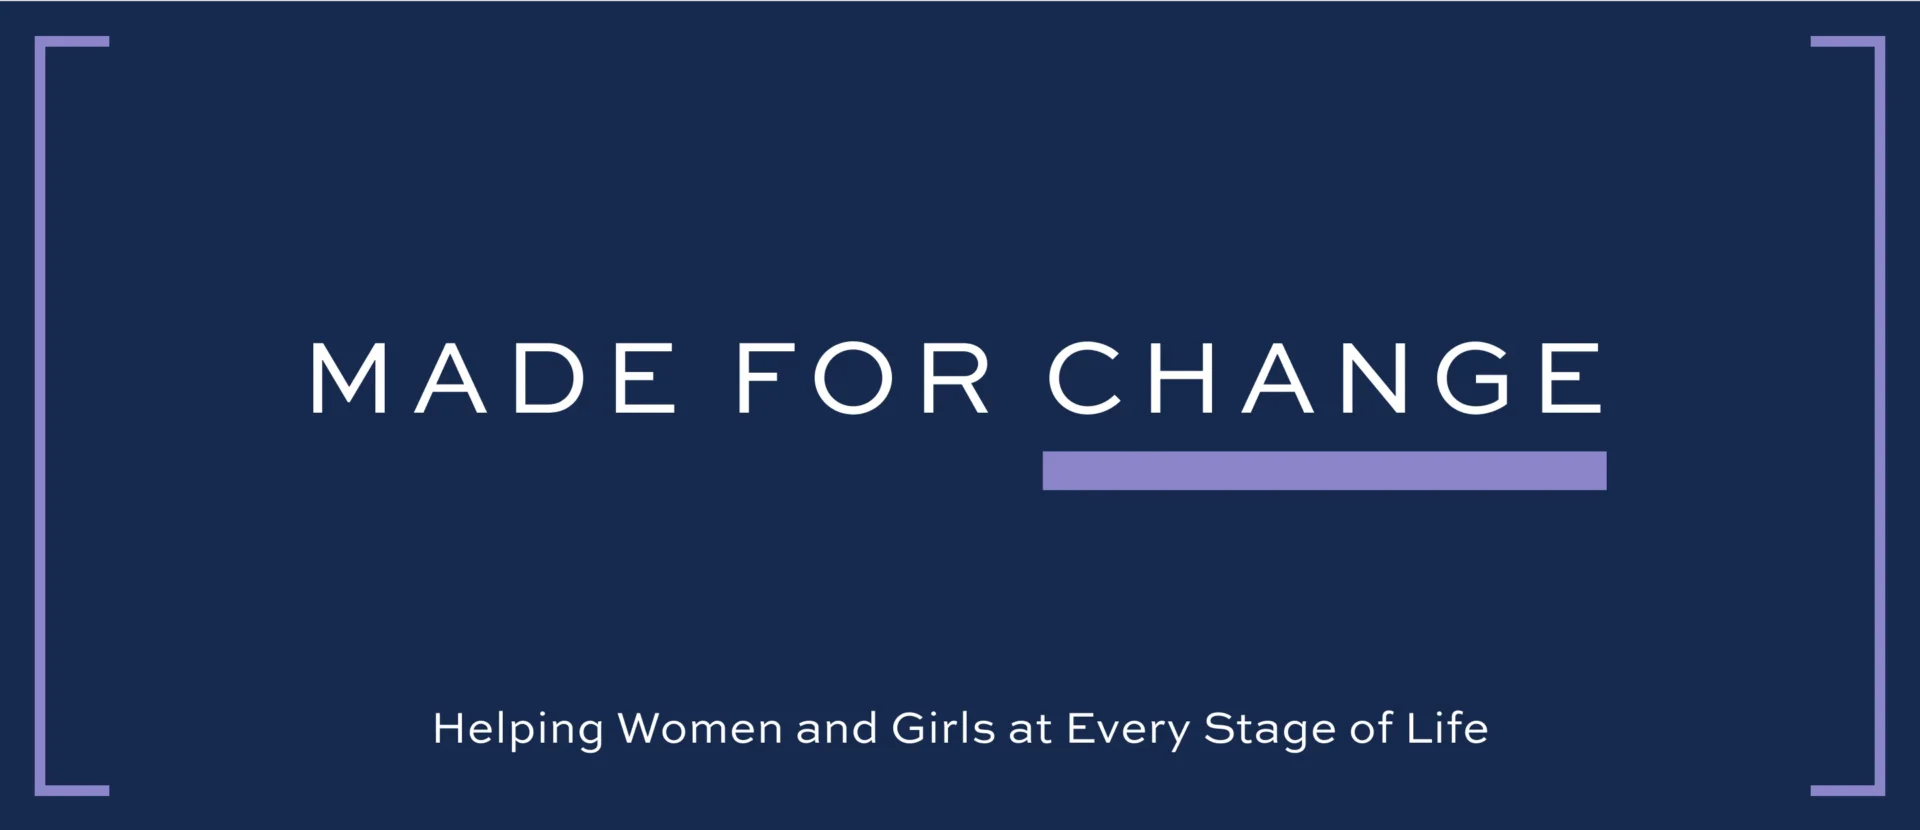 Made for Change Helping Women and Girls at Every Stage of Life